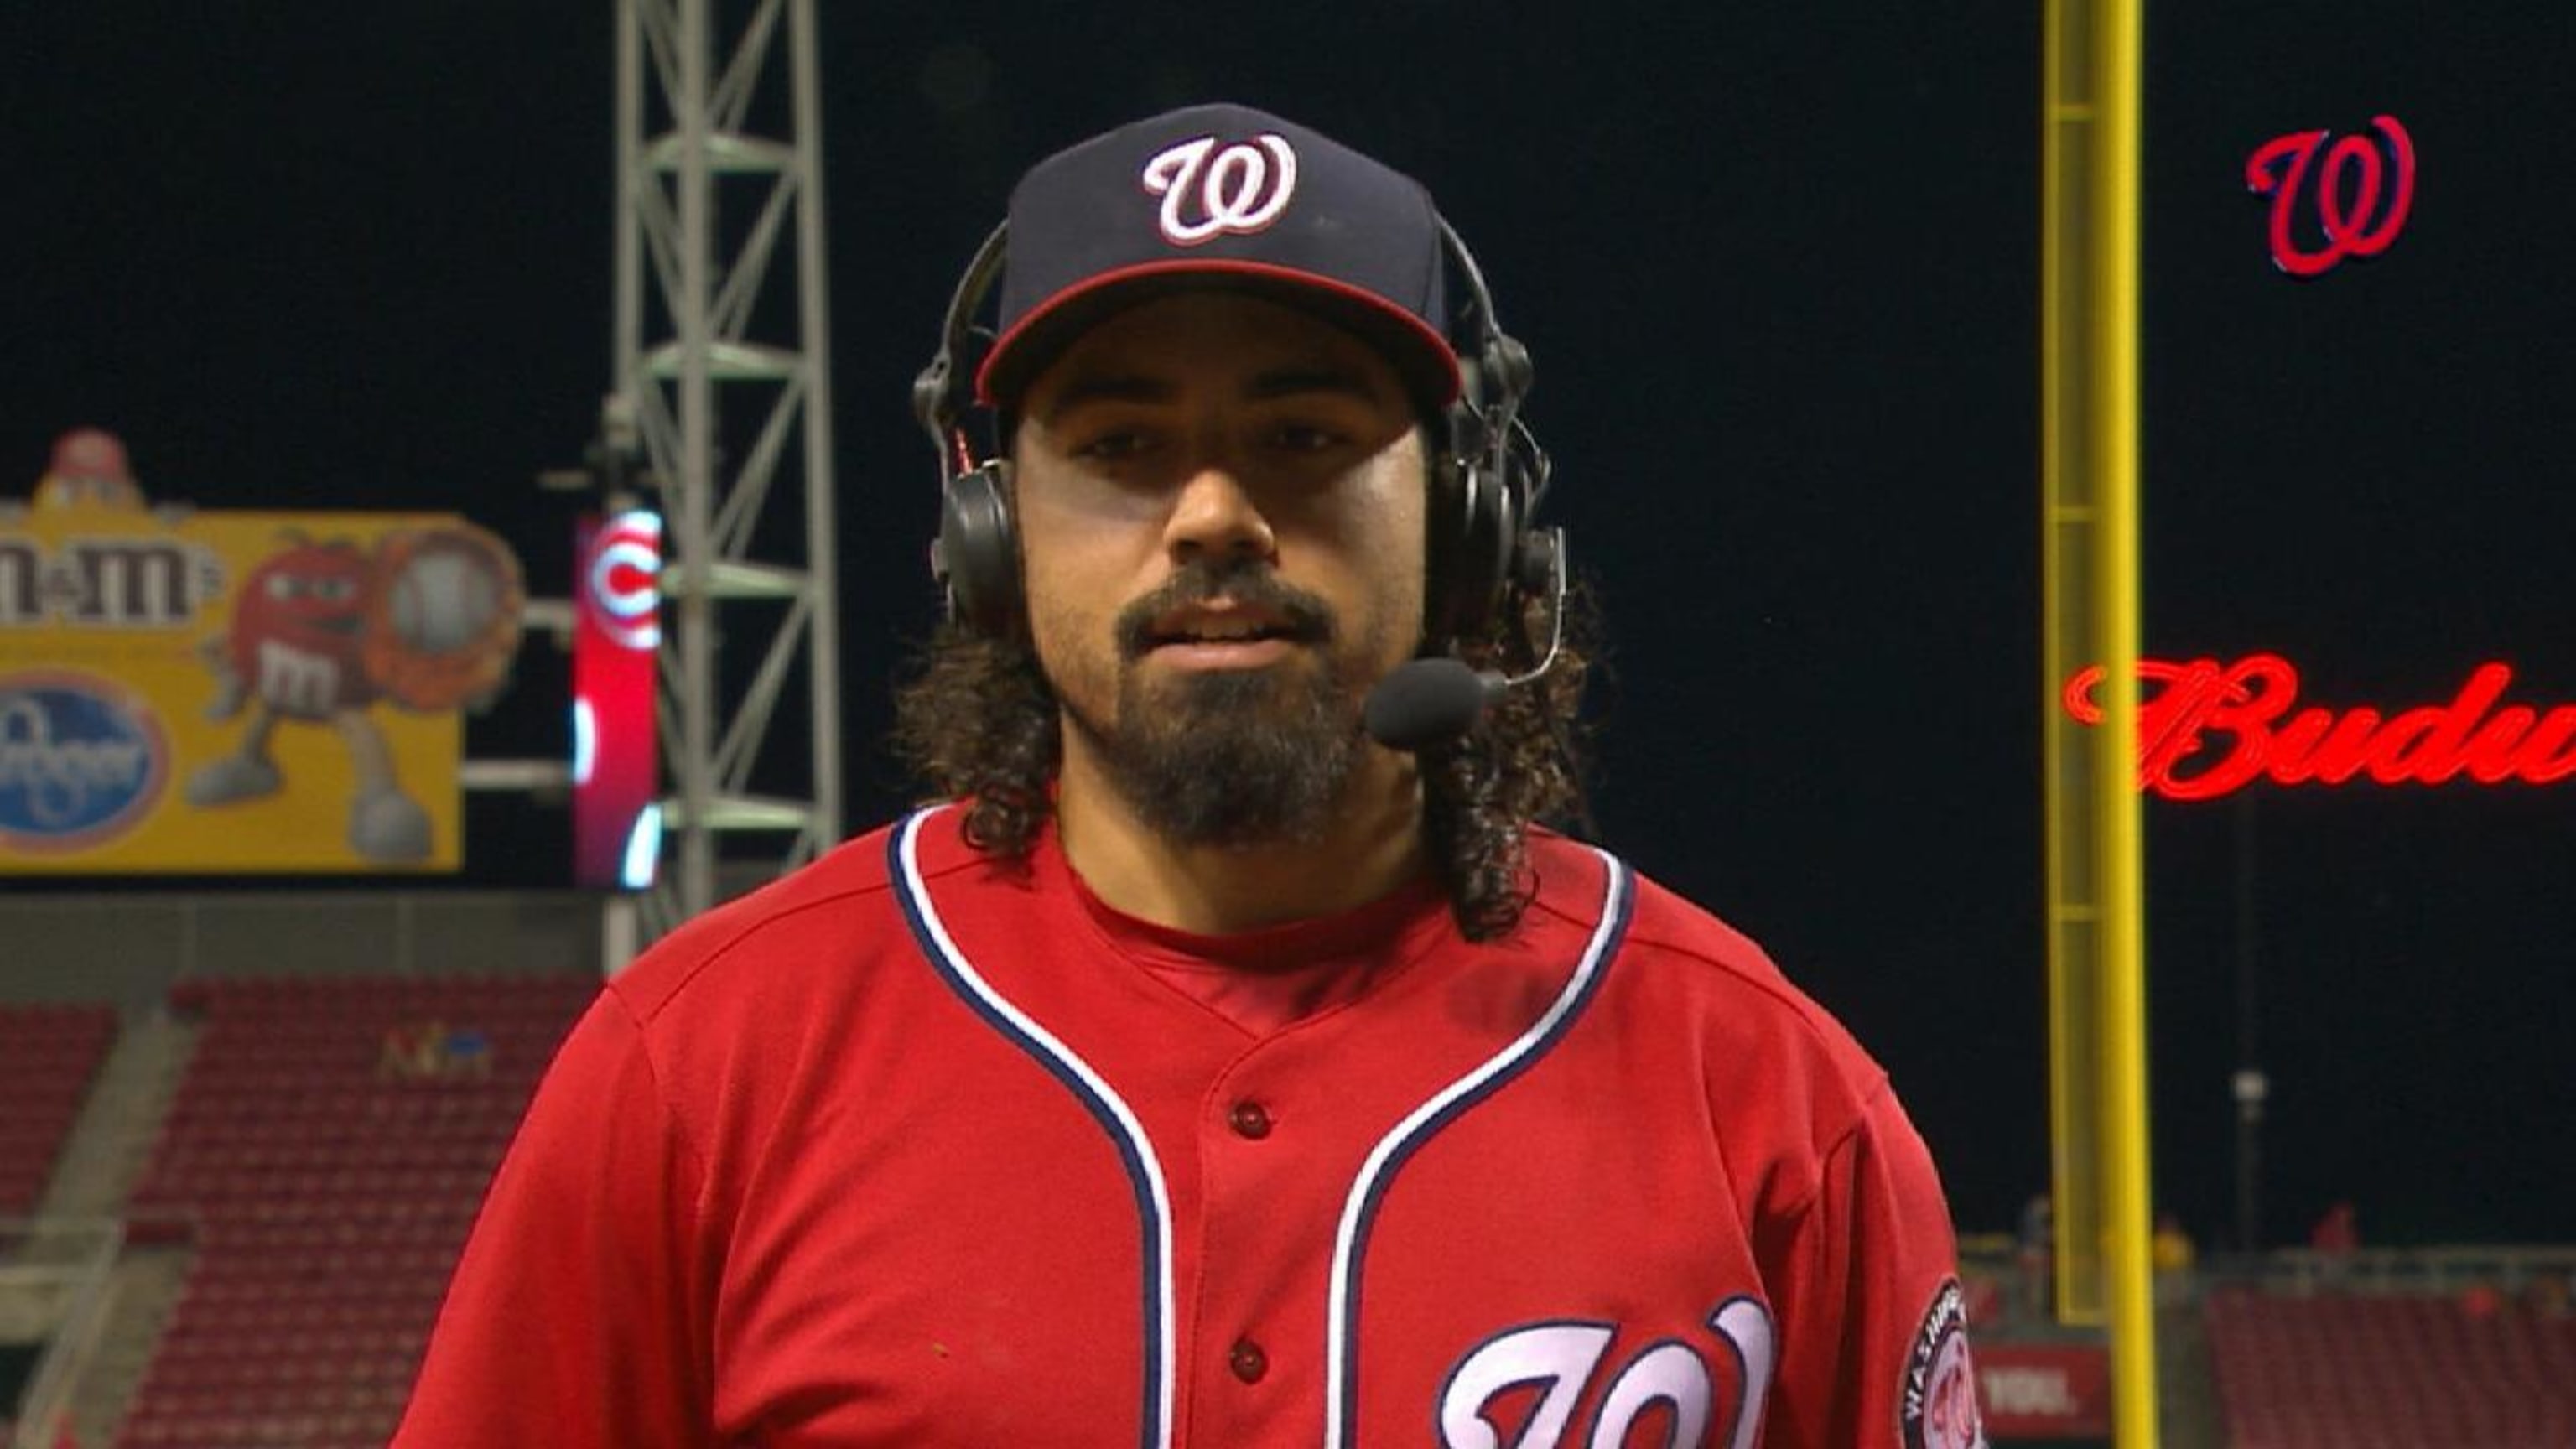 Washington Nationals' Anthony Rendon is congressman adulated after hitting  a two-run home run during the sixth inning of Game 6 of the baseball World  Series against the Houston Astros Tuesday, Oct. 29